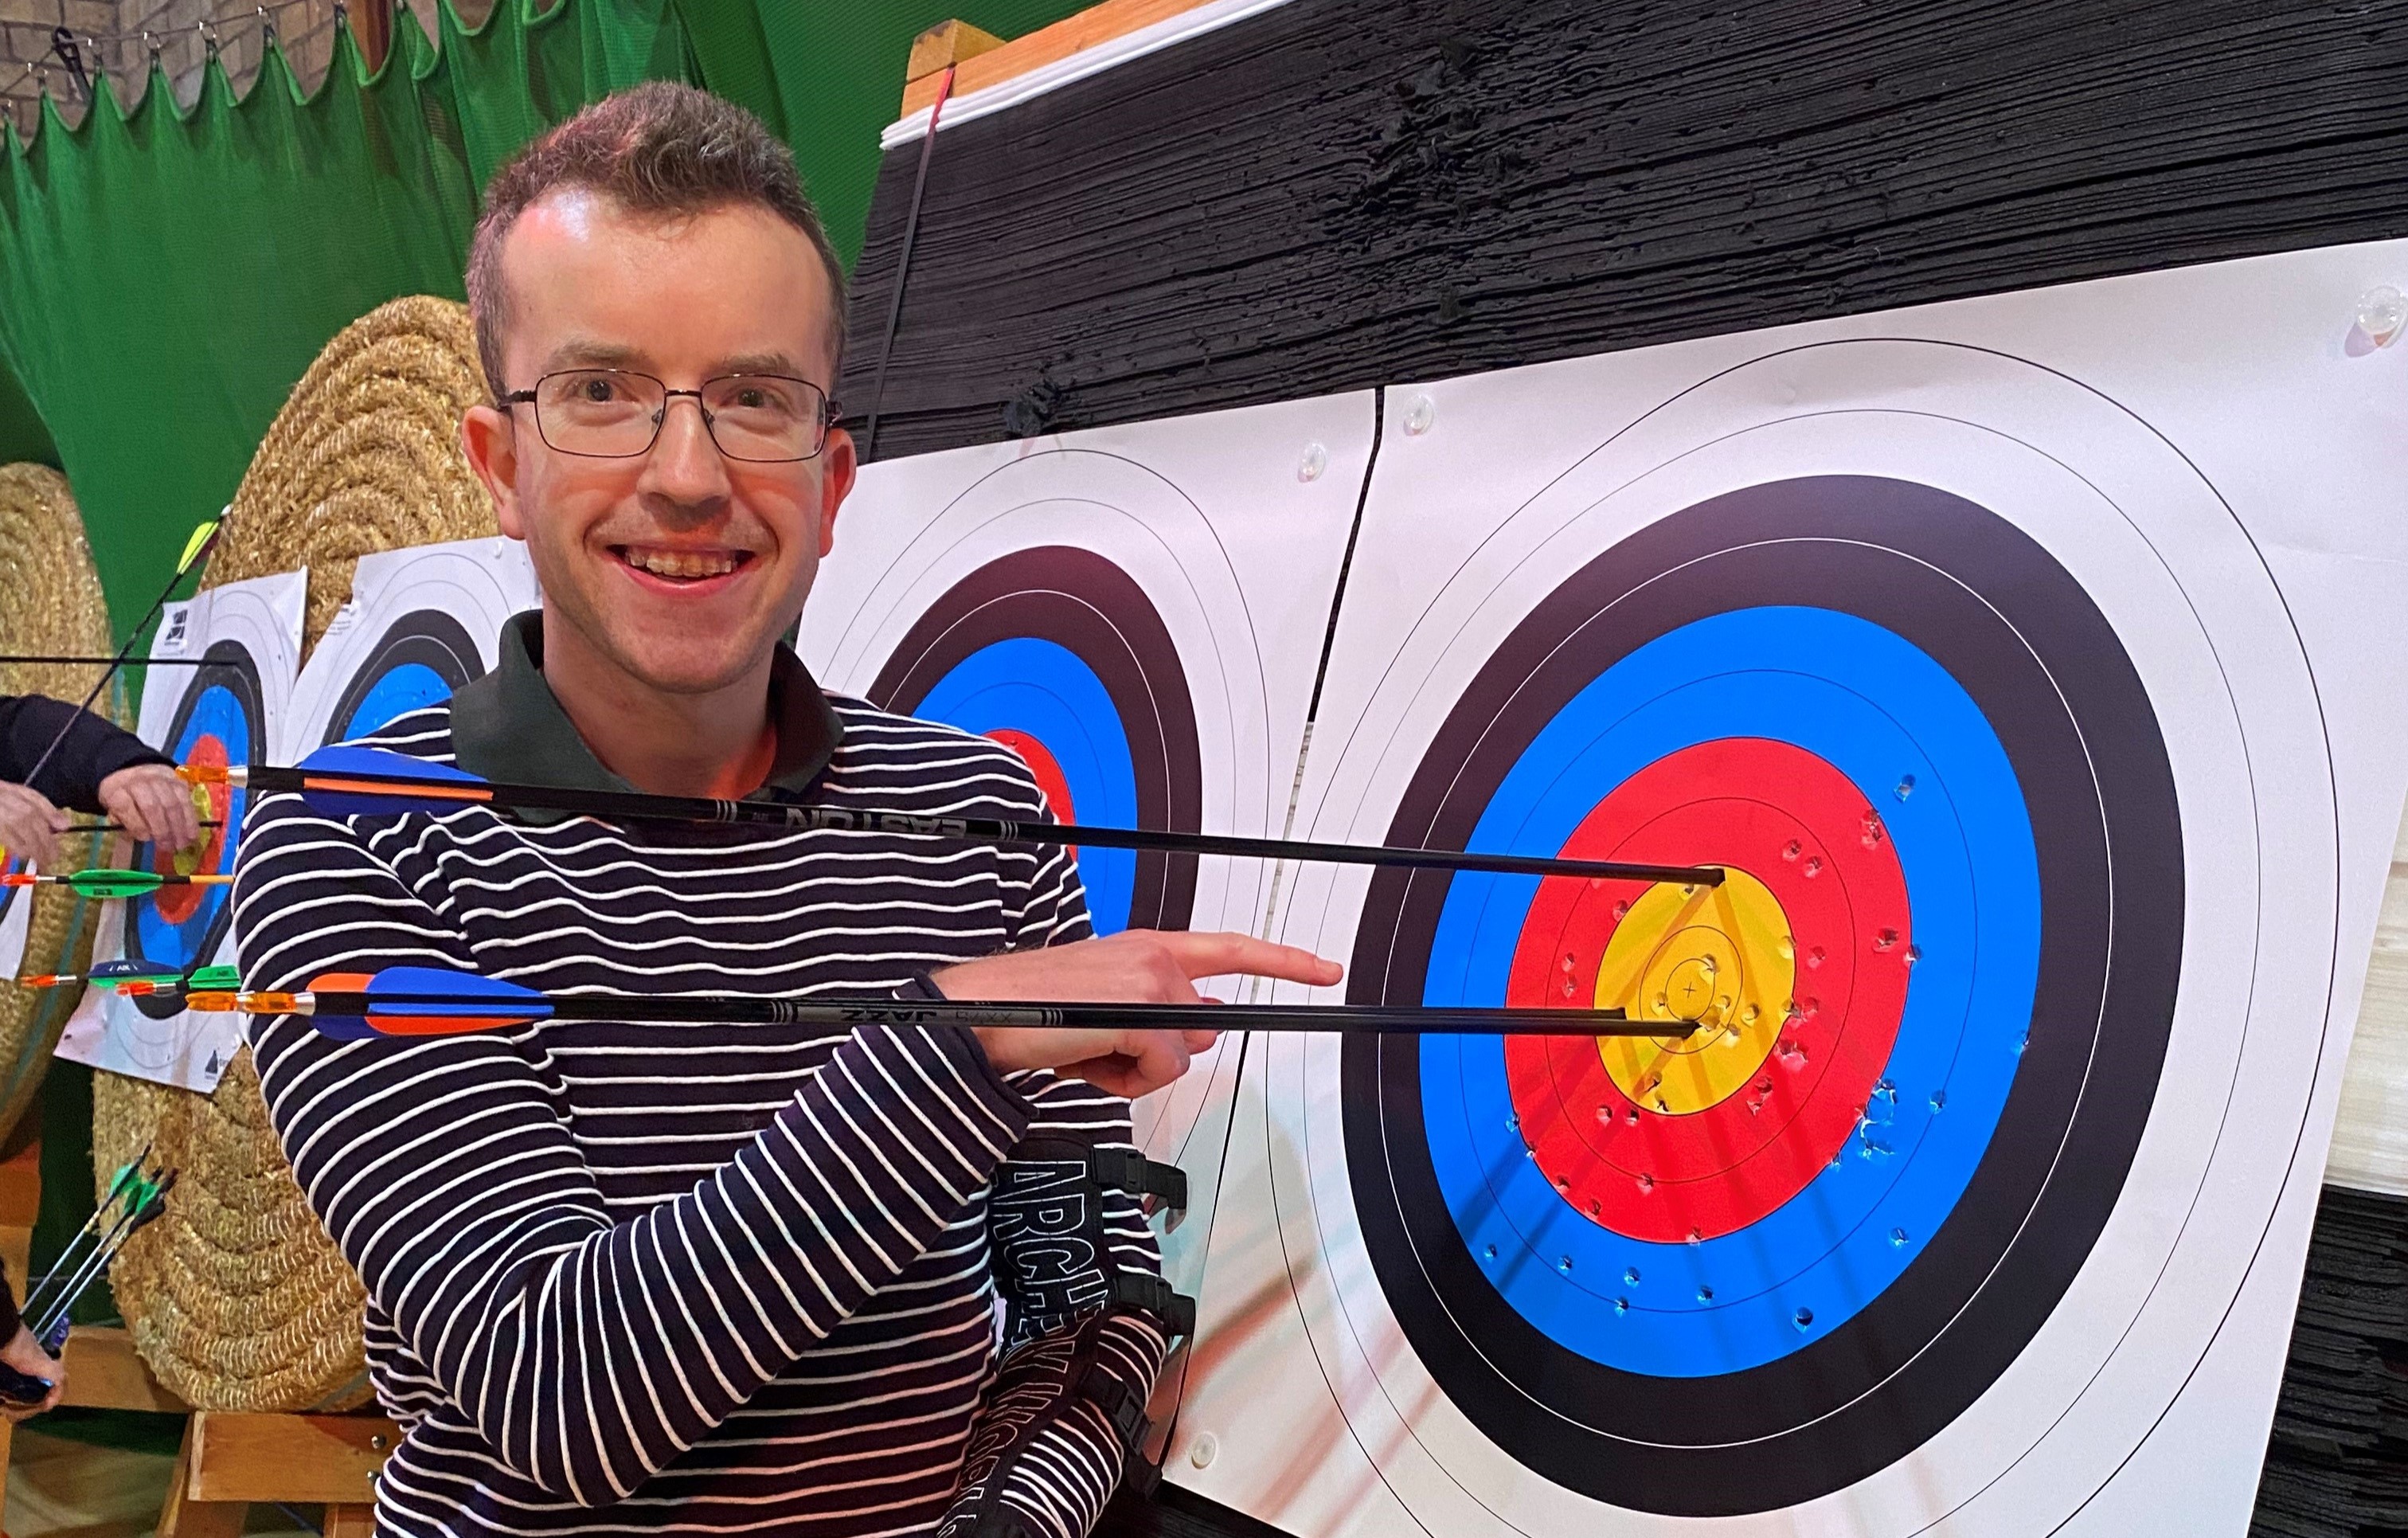 "Archery saved my life" - Matthew aims for better mental health